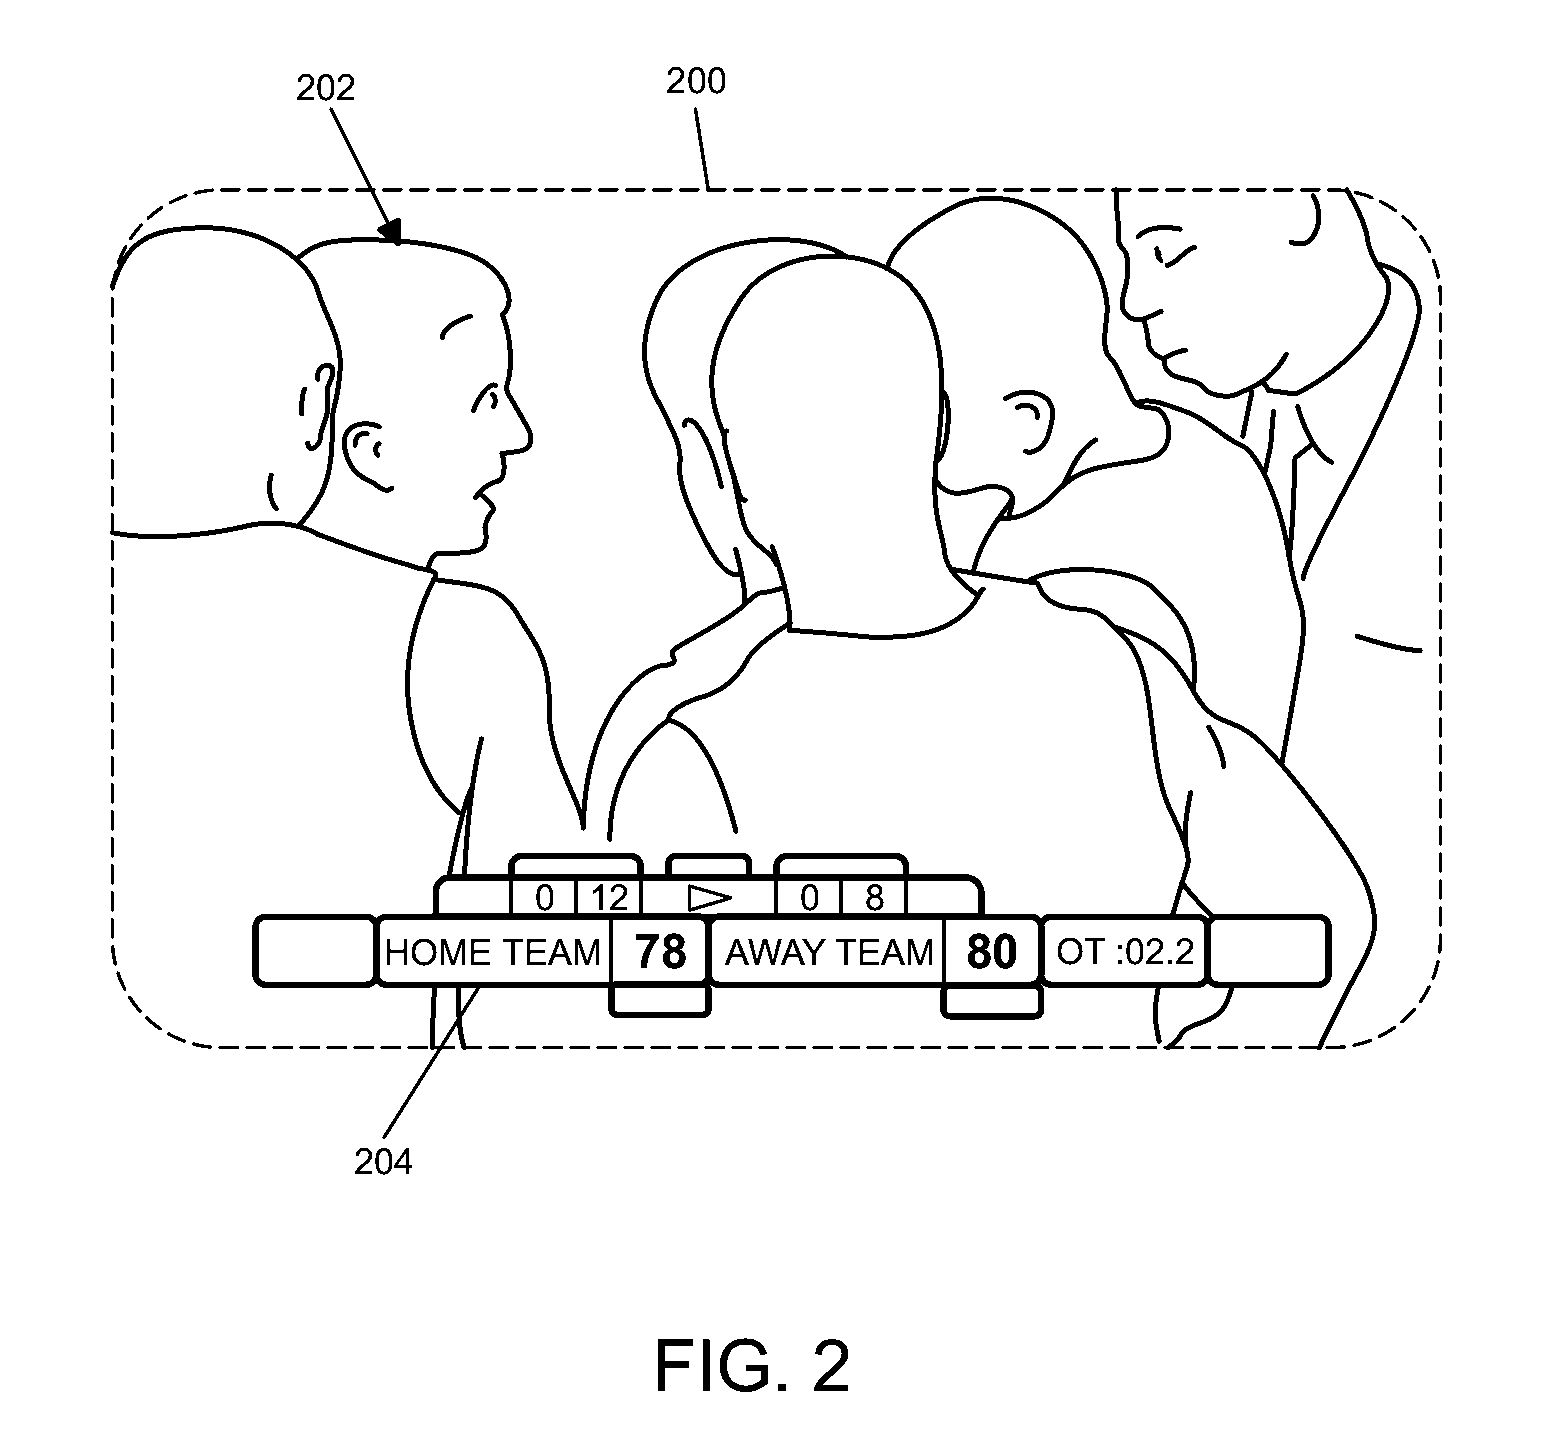 Systems and methods for identifying and separately presenting different portions of multimedia content